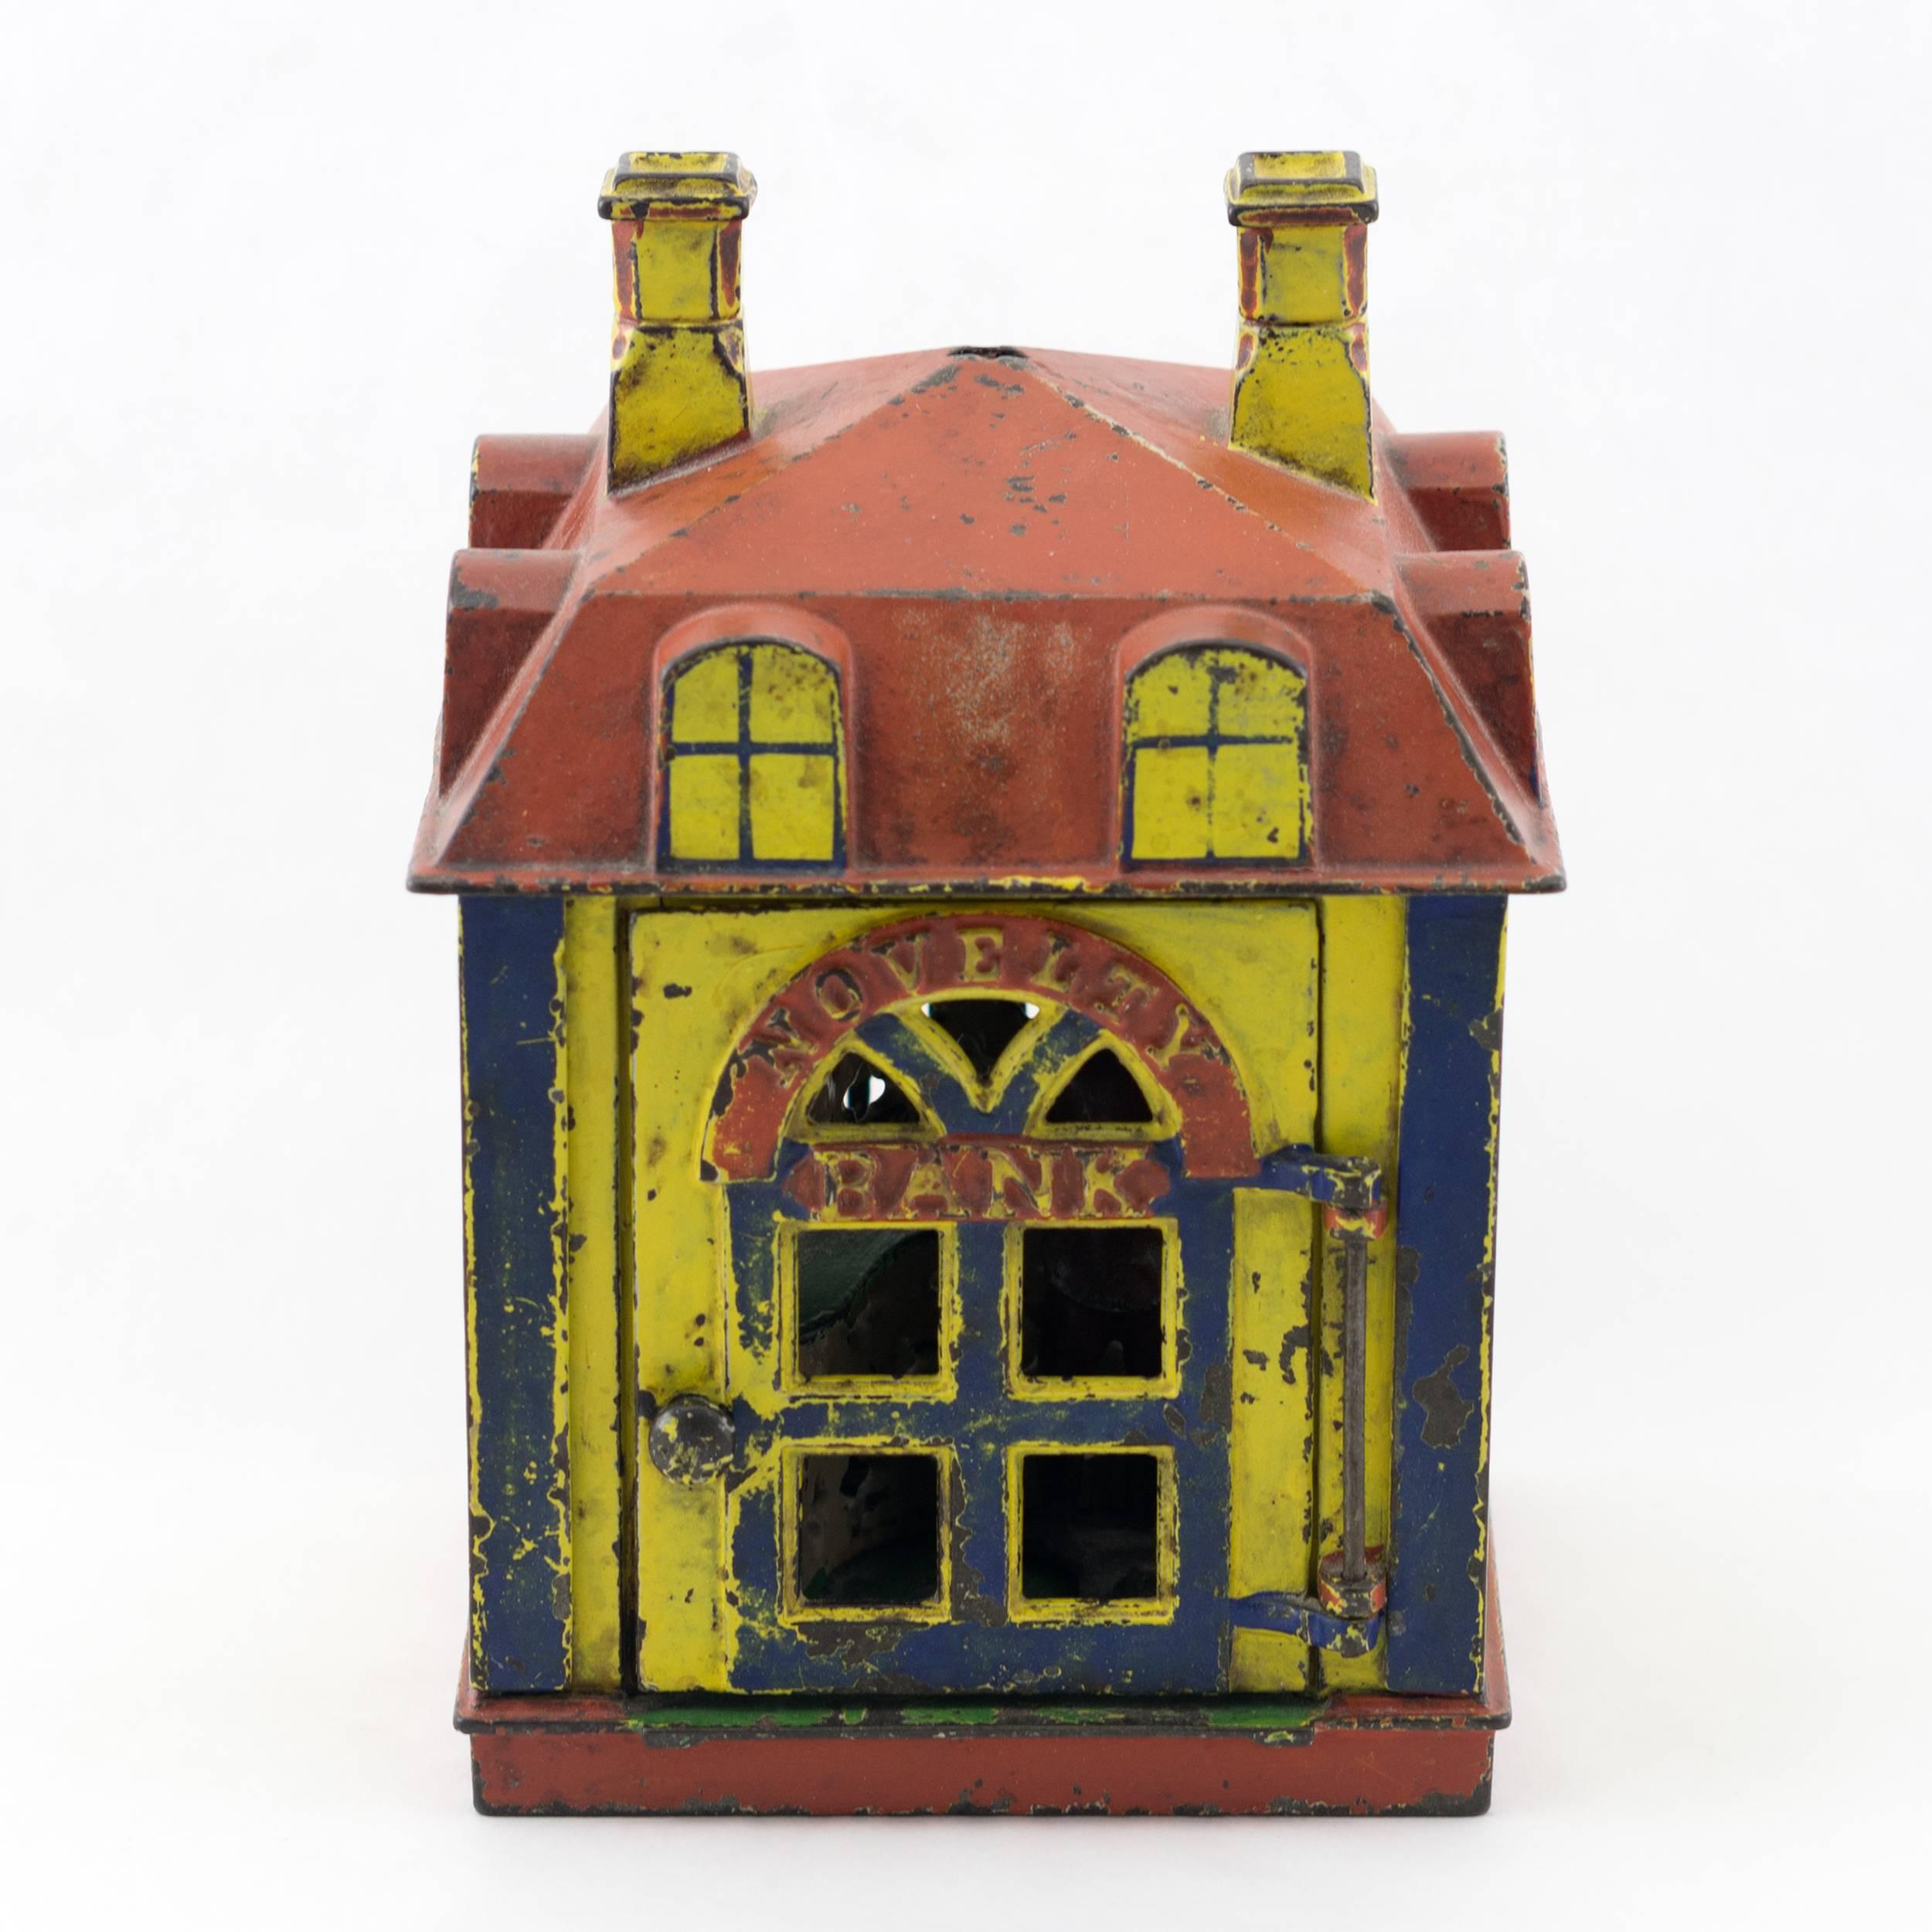 Antique 19th century cast iron mechanical bank by J. & E. Stevens
Super appealing bright original yellow, blue and red paint

circa 1873. The J. & E. Stevens Company of Cromwell, Connecticut manufactured Charles H. Johnson’s Novelty Bank in many